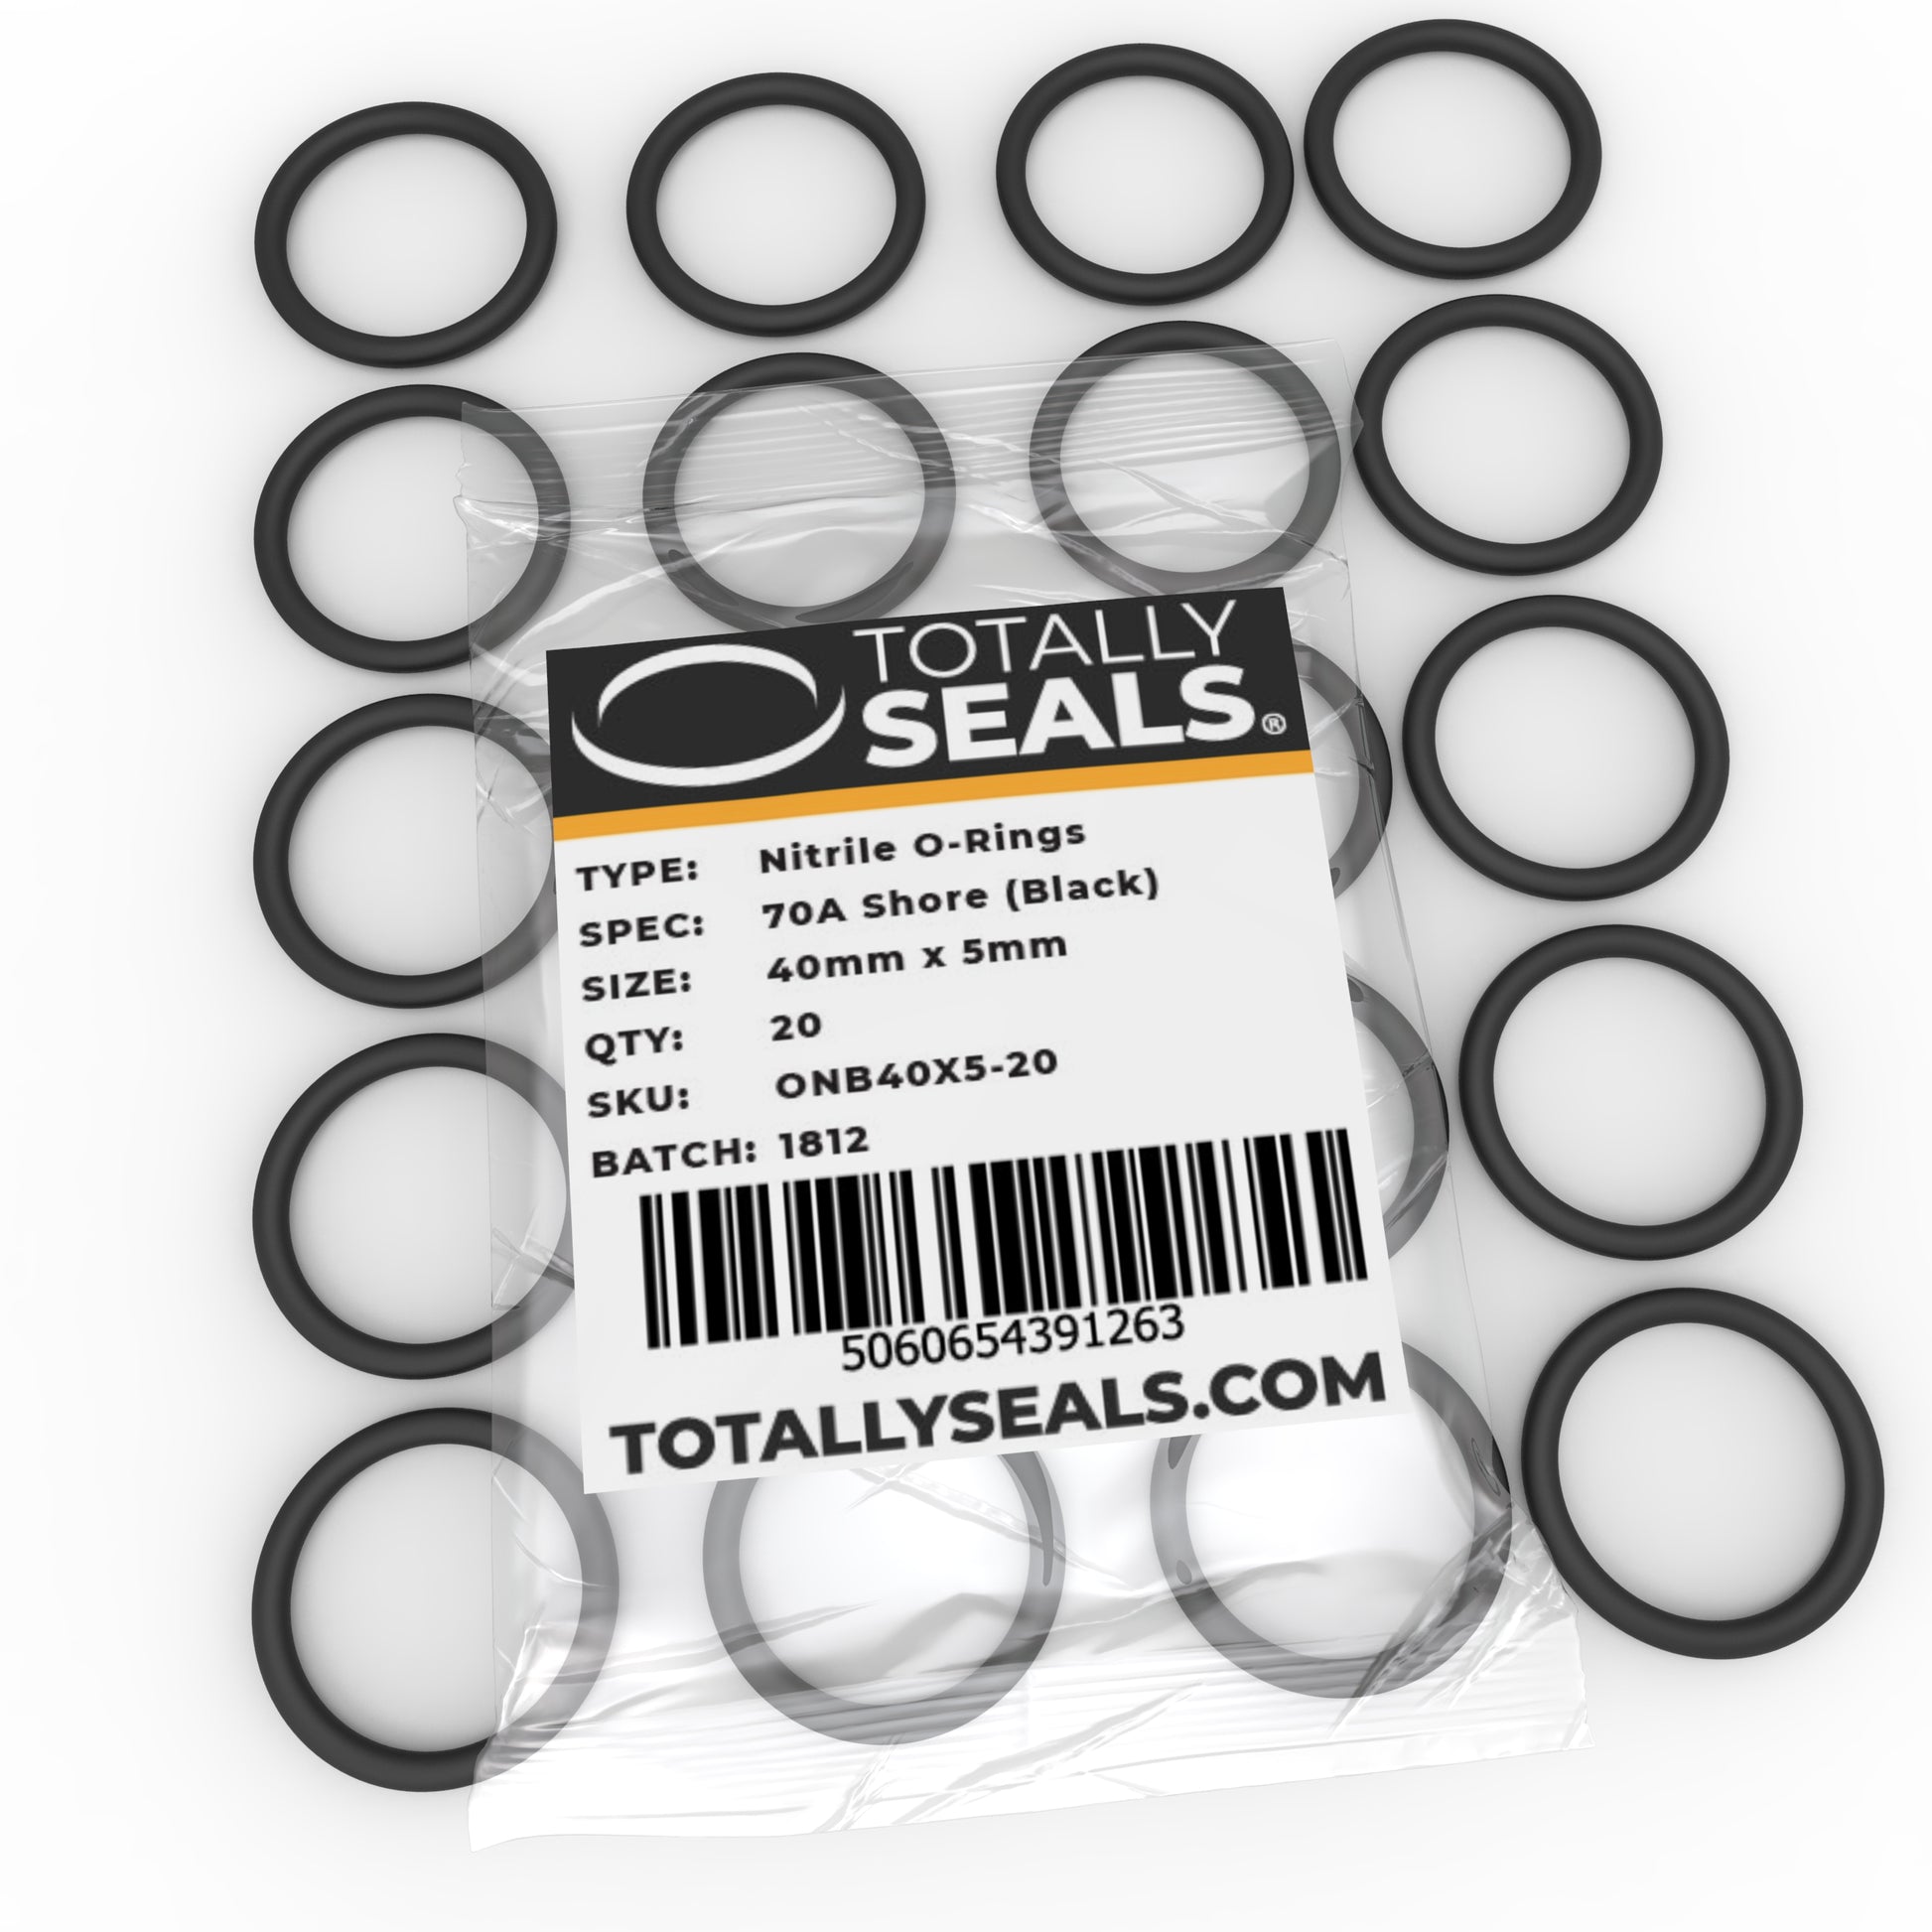 40mm x 5mm (50mm OD) Nitrile O-Rings - Totally Seals®